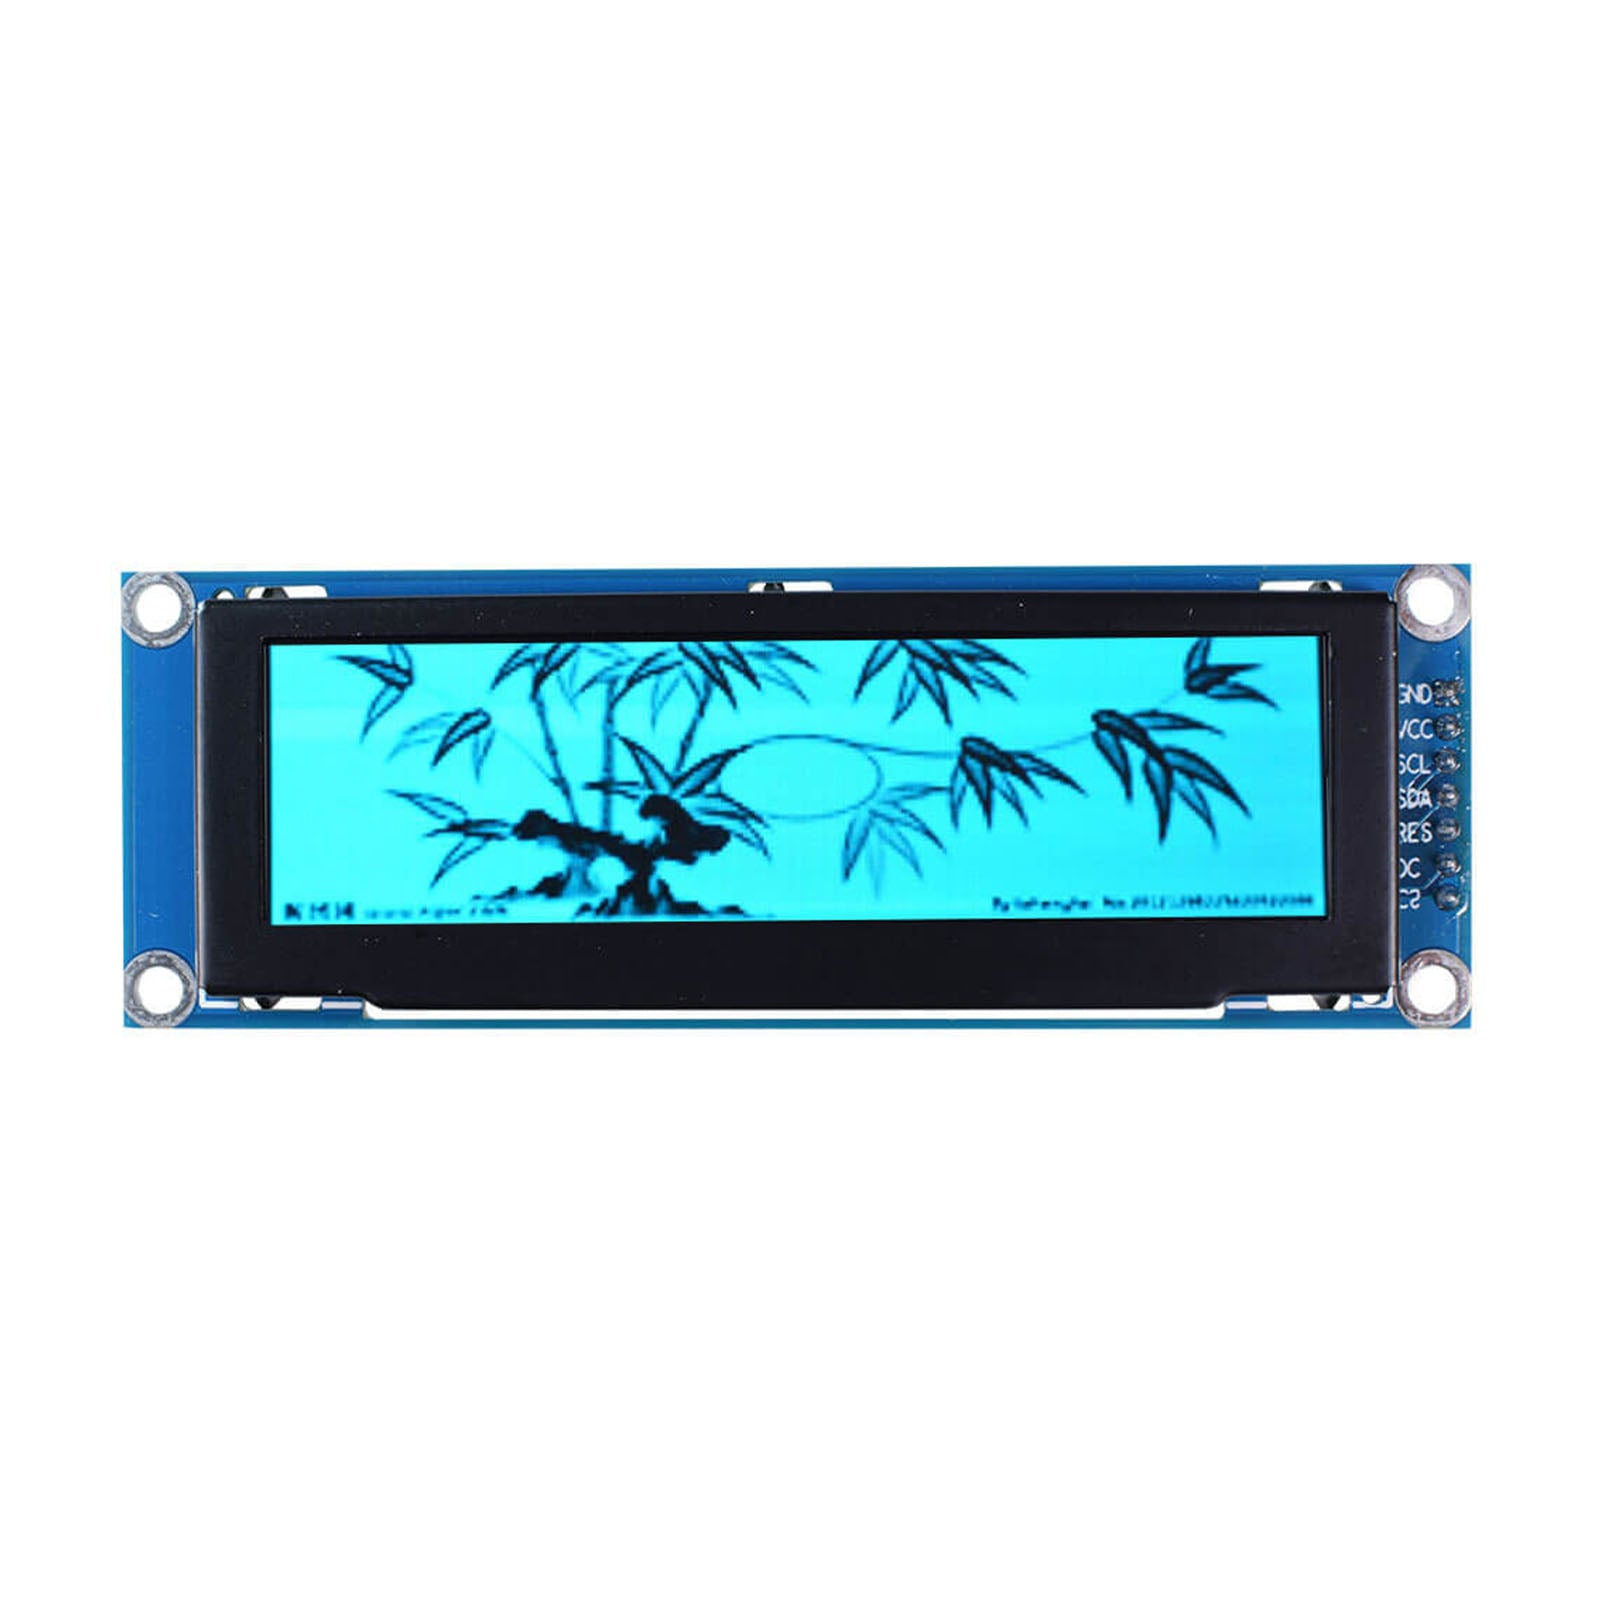 Monochrome blue OLED display module showing a Chinese-style bamboo painting